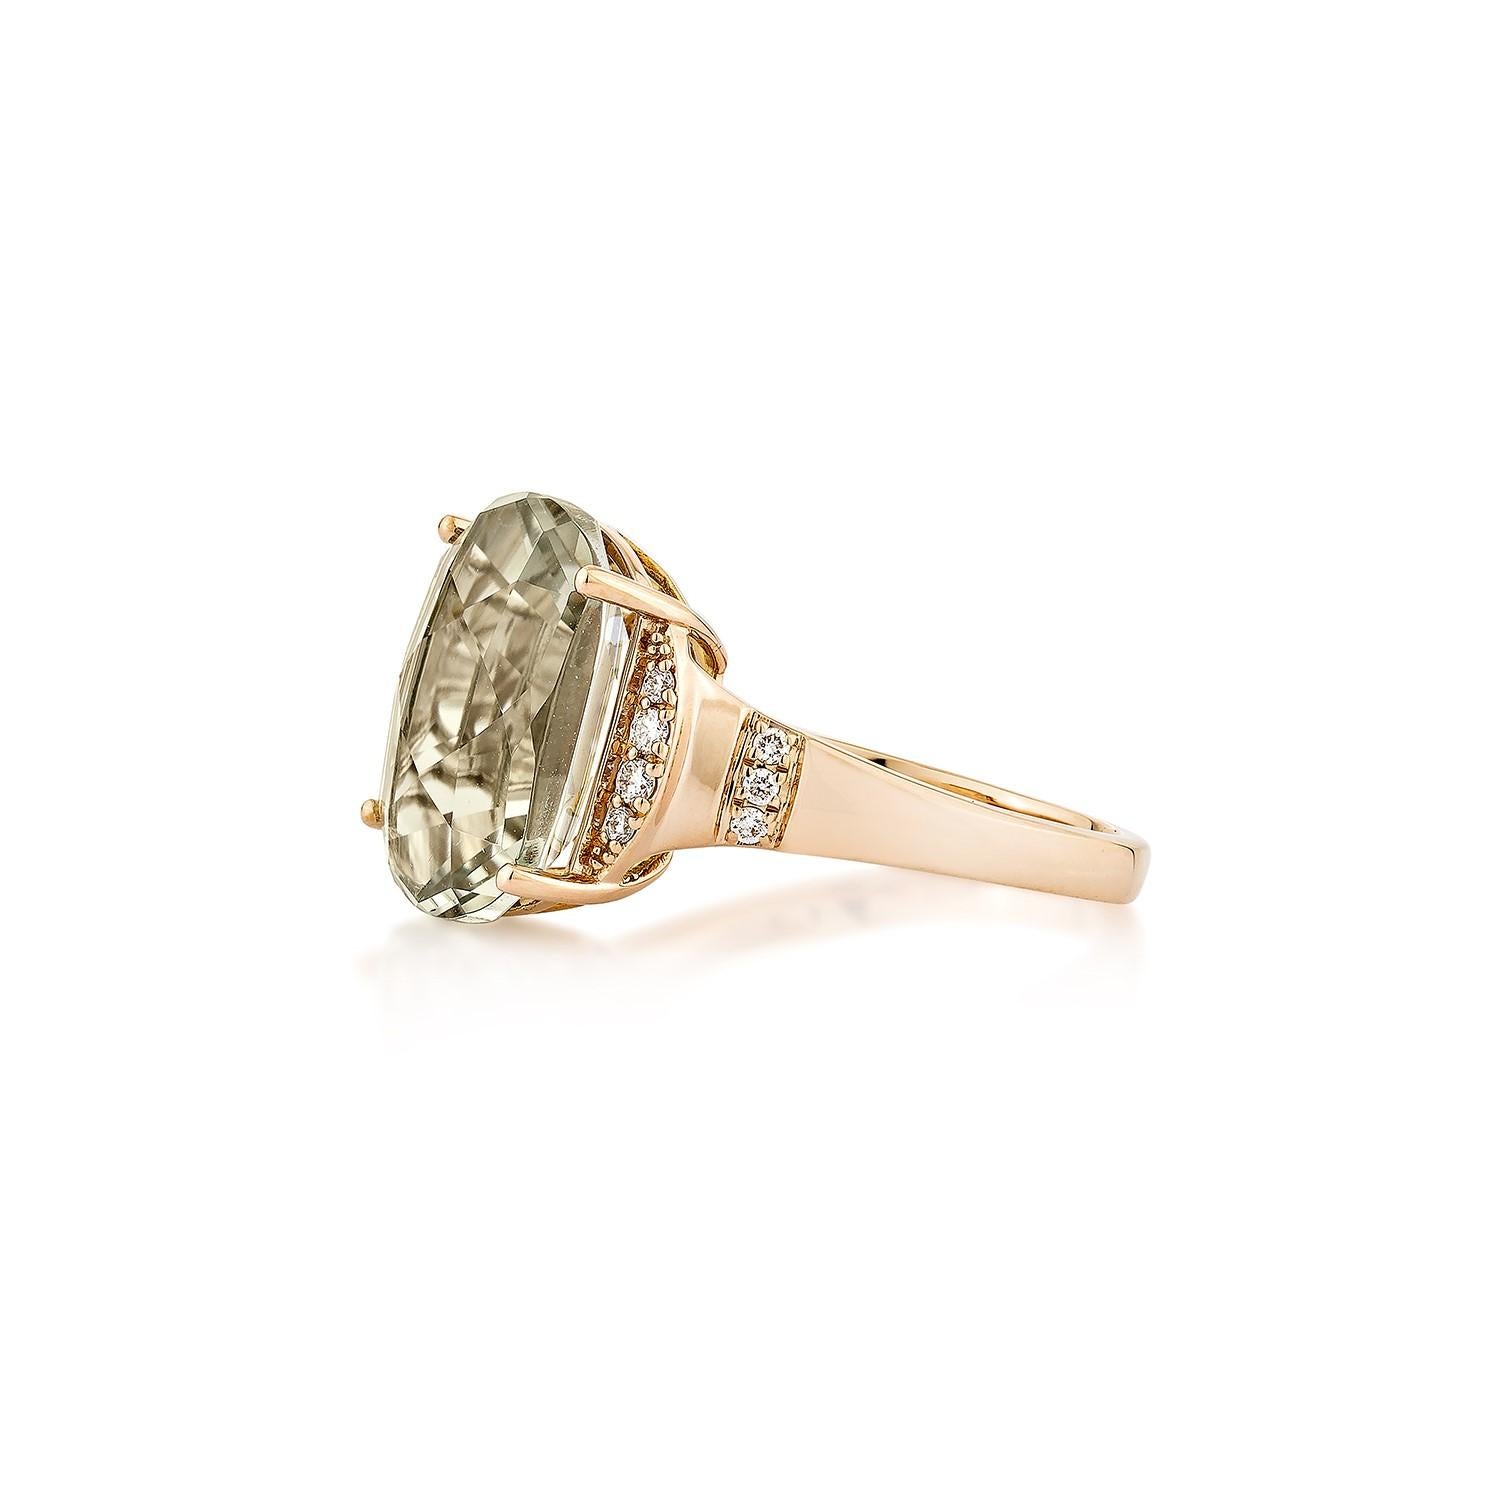 Oval Cut 5.98 Carat Green Amethyst Fancy Ring in 18Karat Yellow Gold with Diamond. For Sale